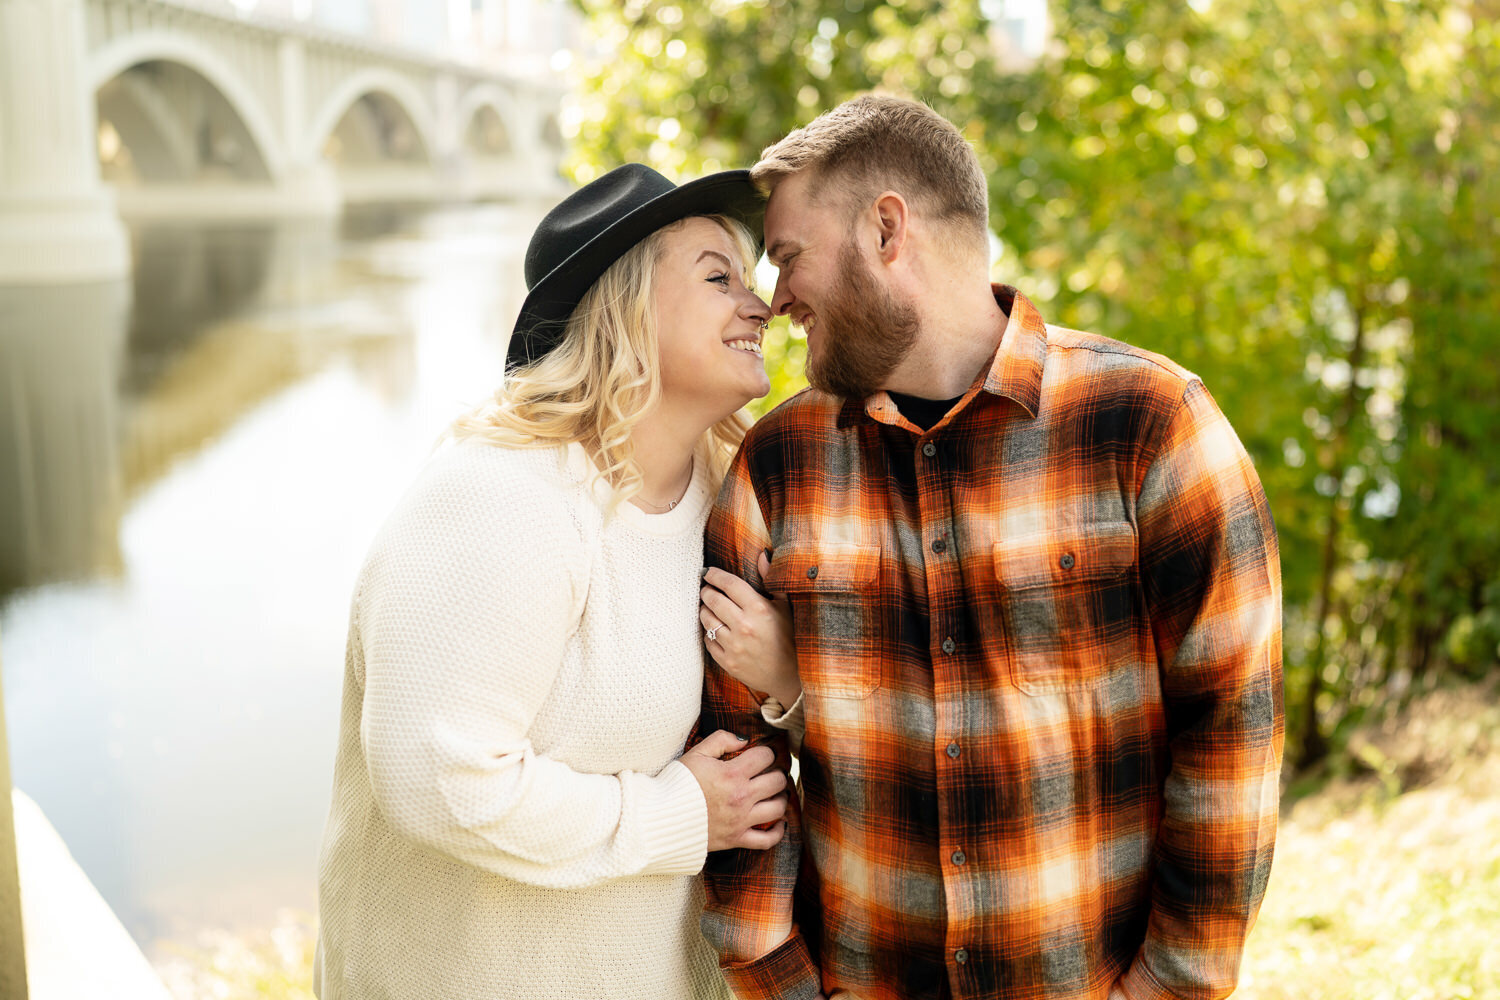 Alex and Zach - Minnesota Fall Engagement Photography - Saint Anthony Main - RKH Images (247 of 314)